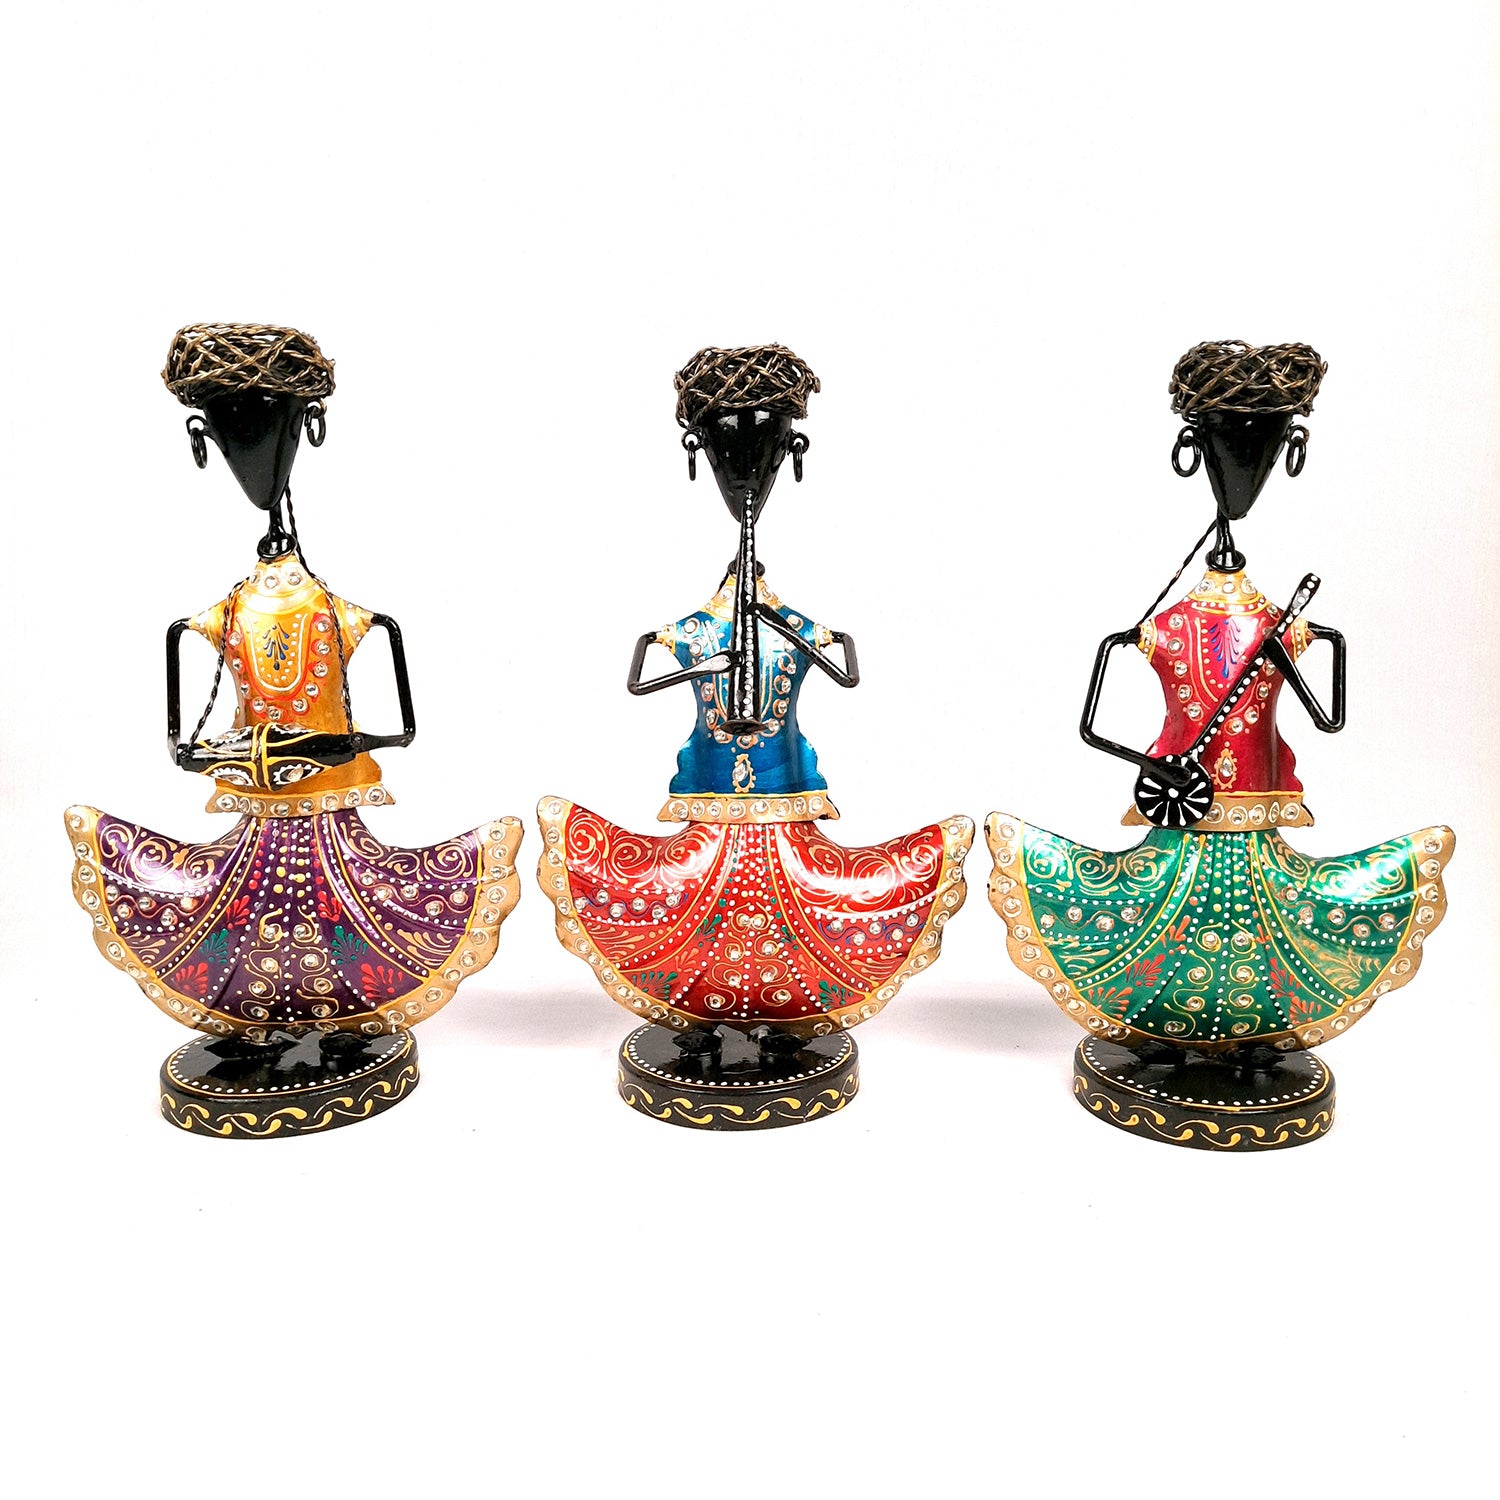 Showpiece Musician Set With Kundan Work | Decorative Figurine Playing Musical Instrument - For Home, Table, Living Room & TV Unit | Showpieces For Gifts - 12 Inch (Set of 3) - Apkamart